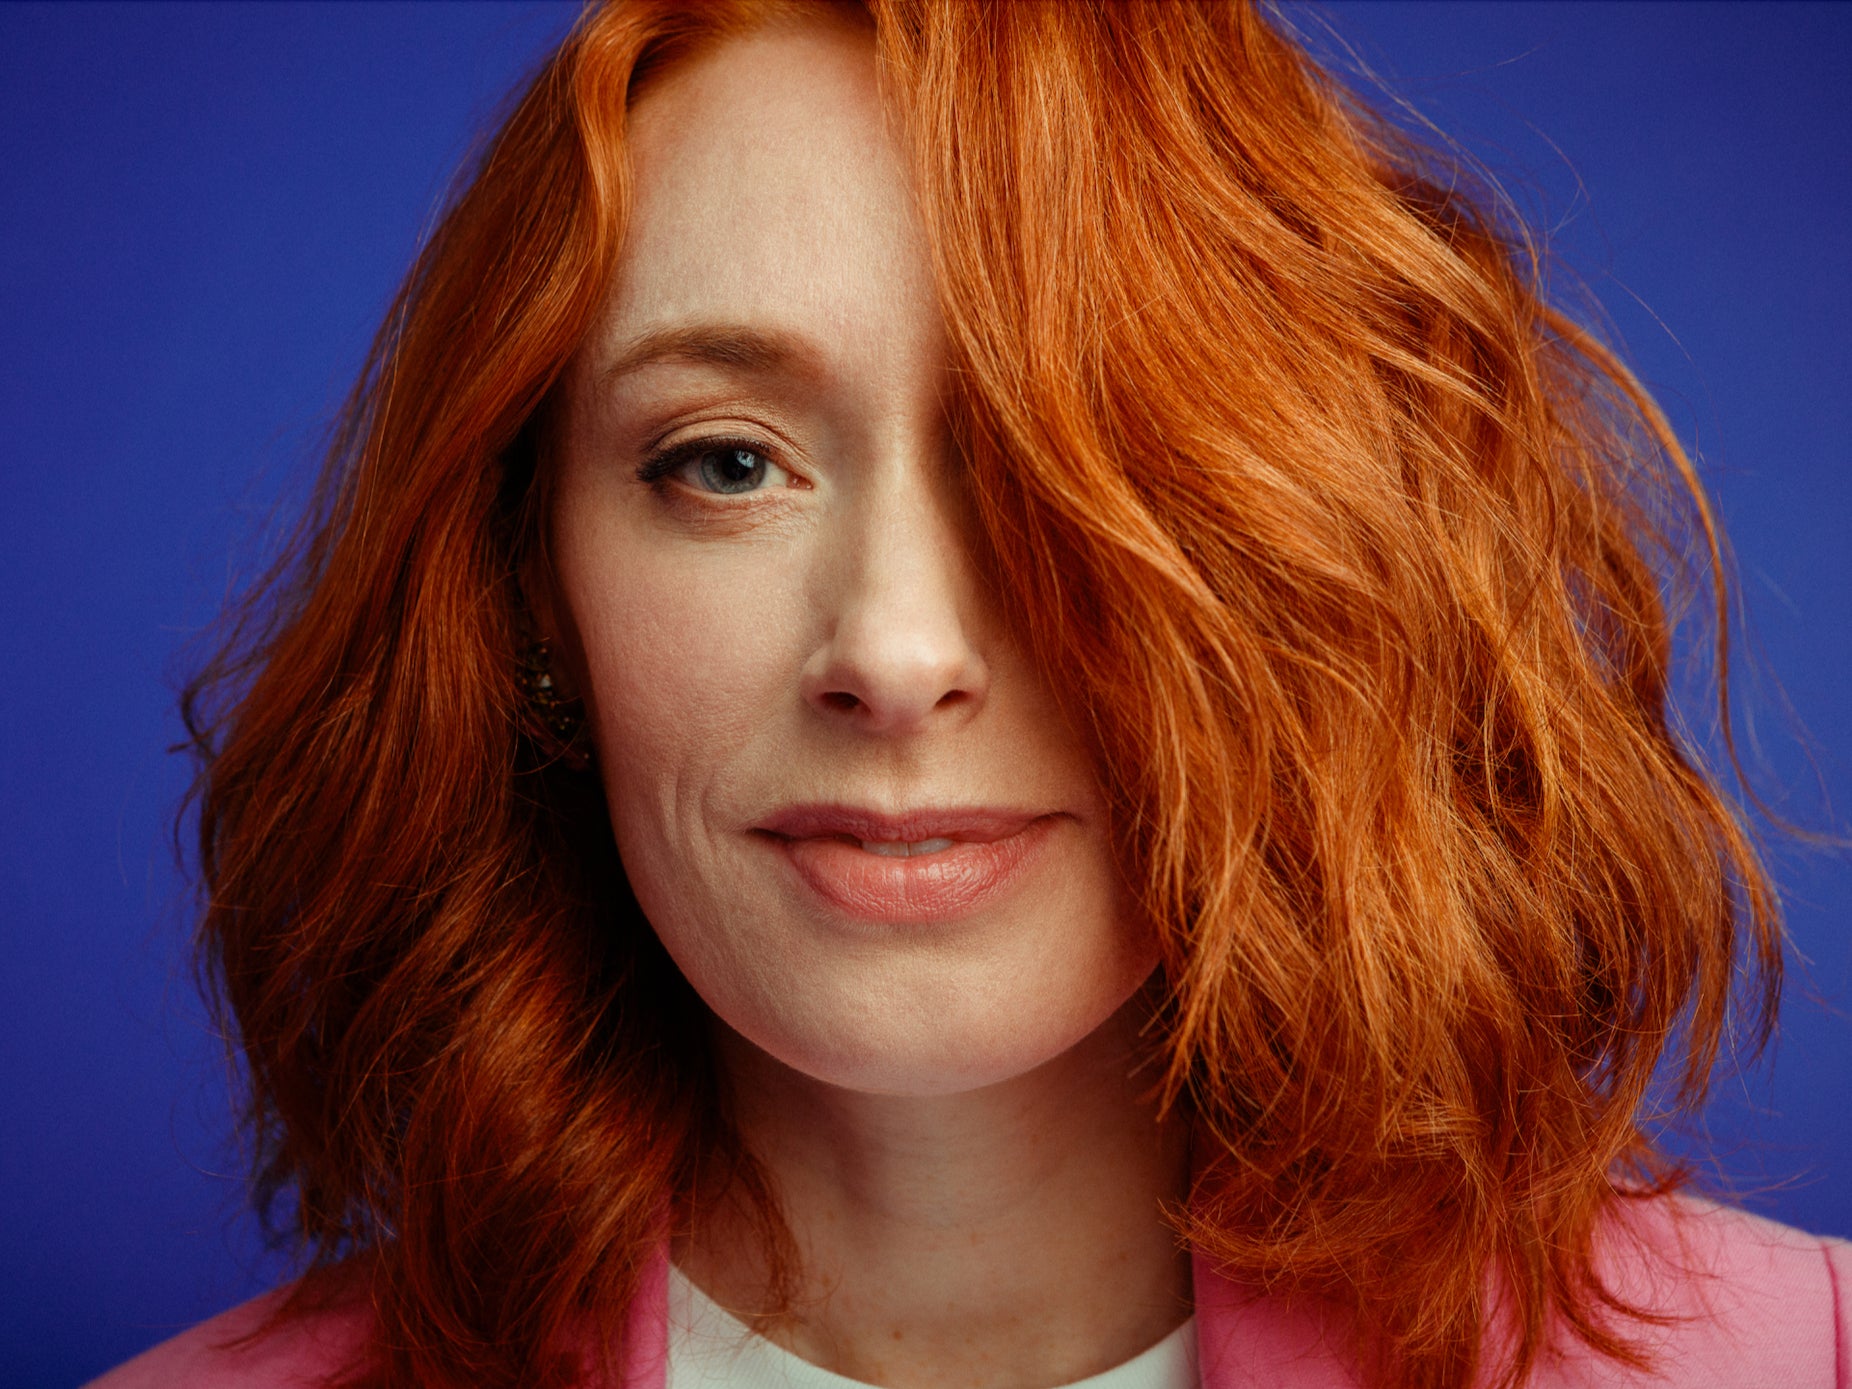 Mathematics of Love author Hannah Fry When you have cancer, youre just like, “Get it out of me, Im terrified” The Independent image